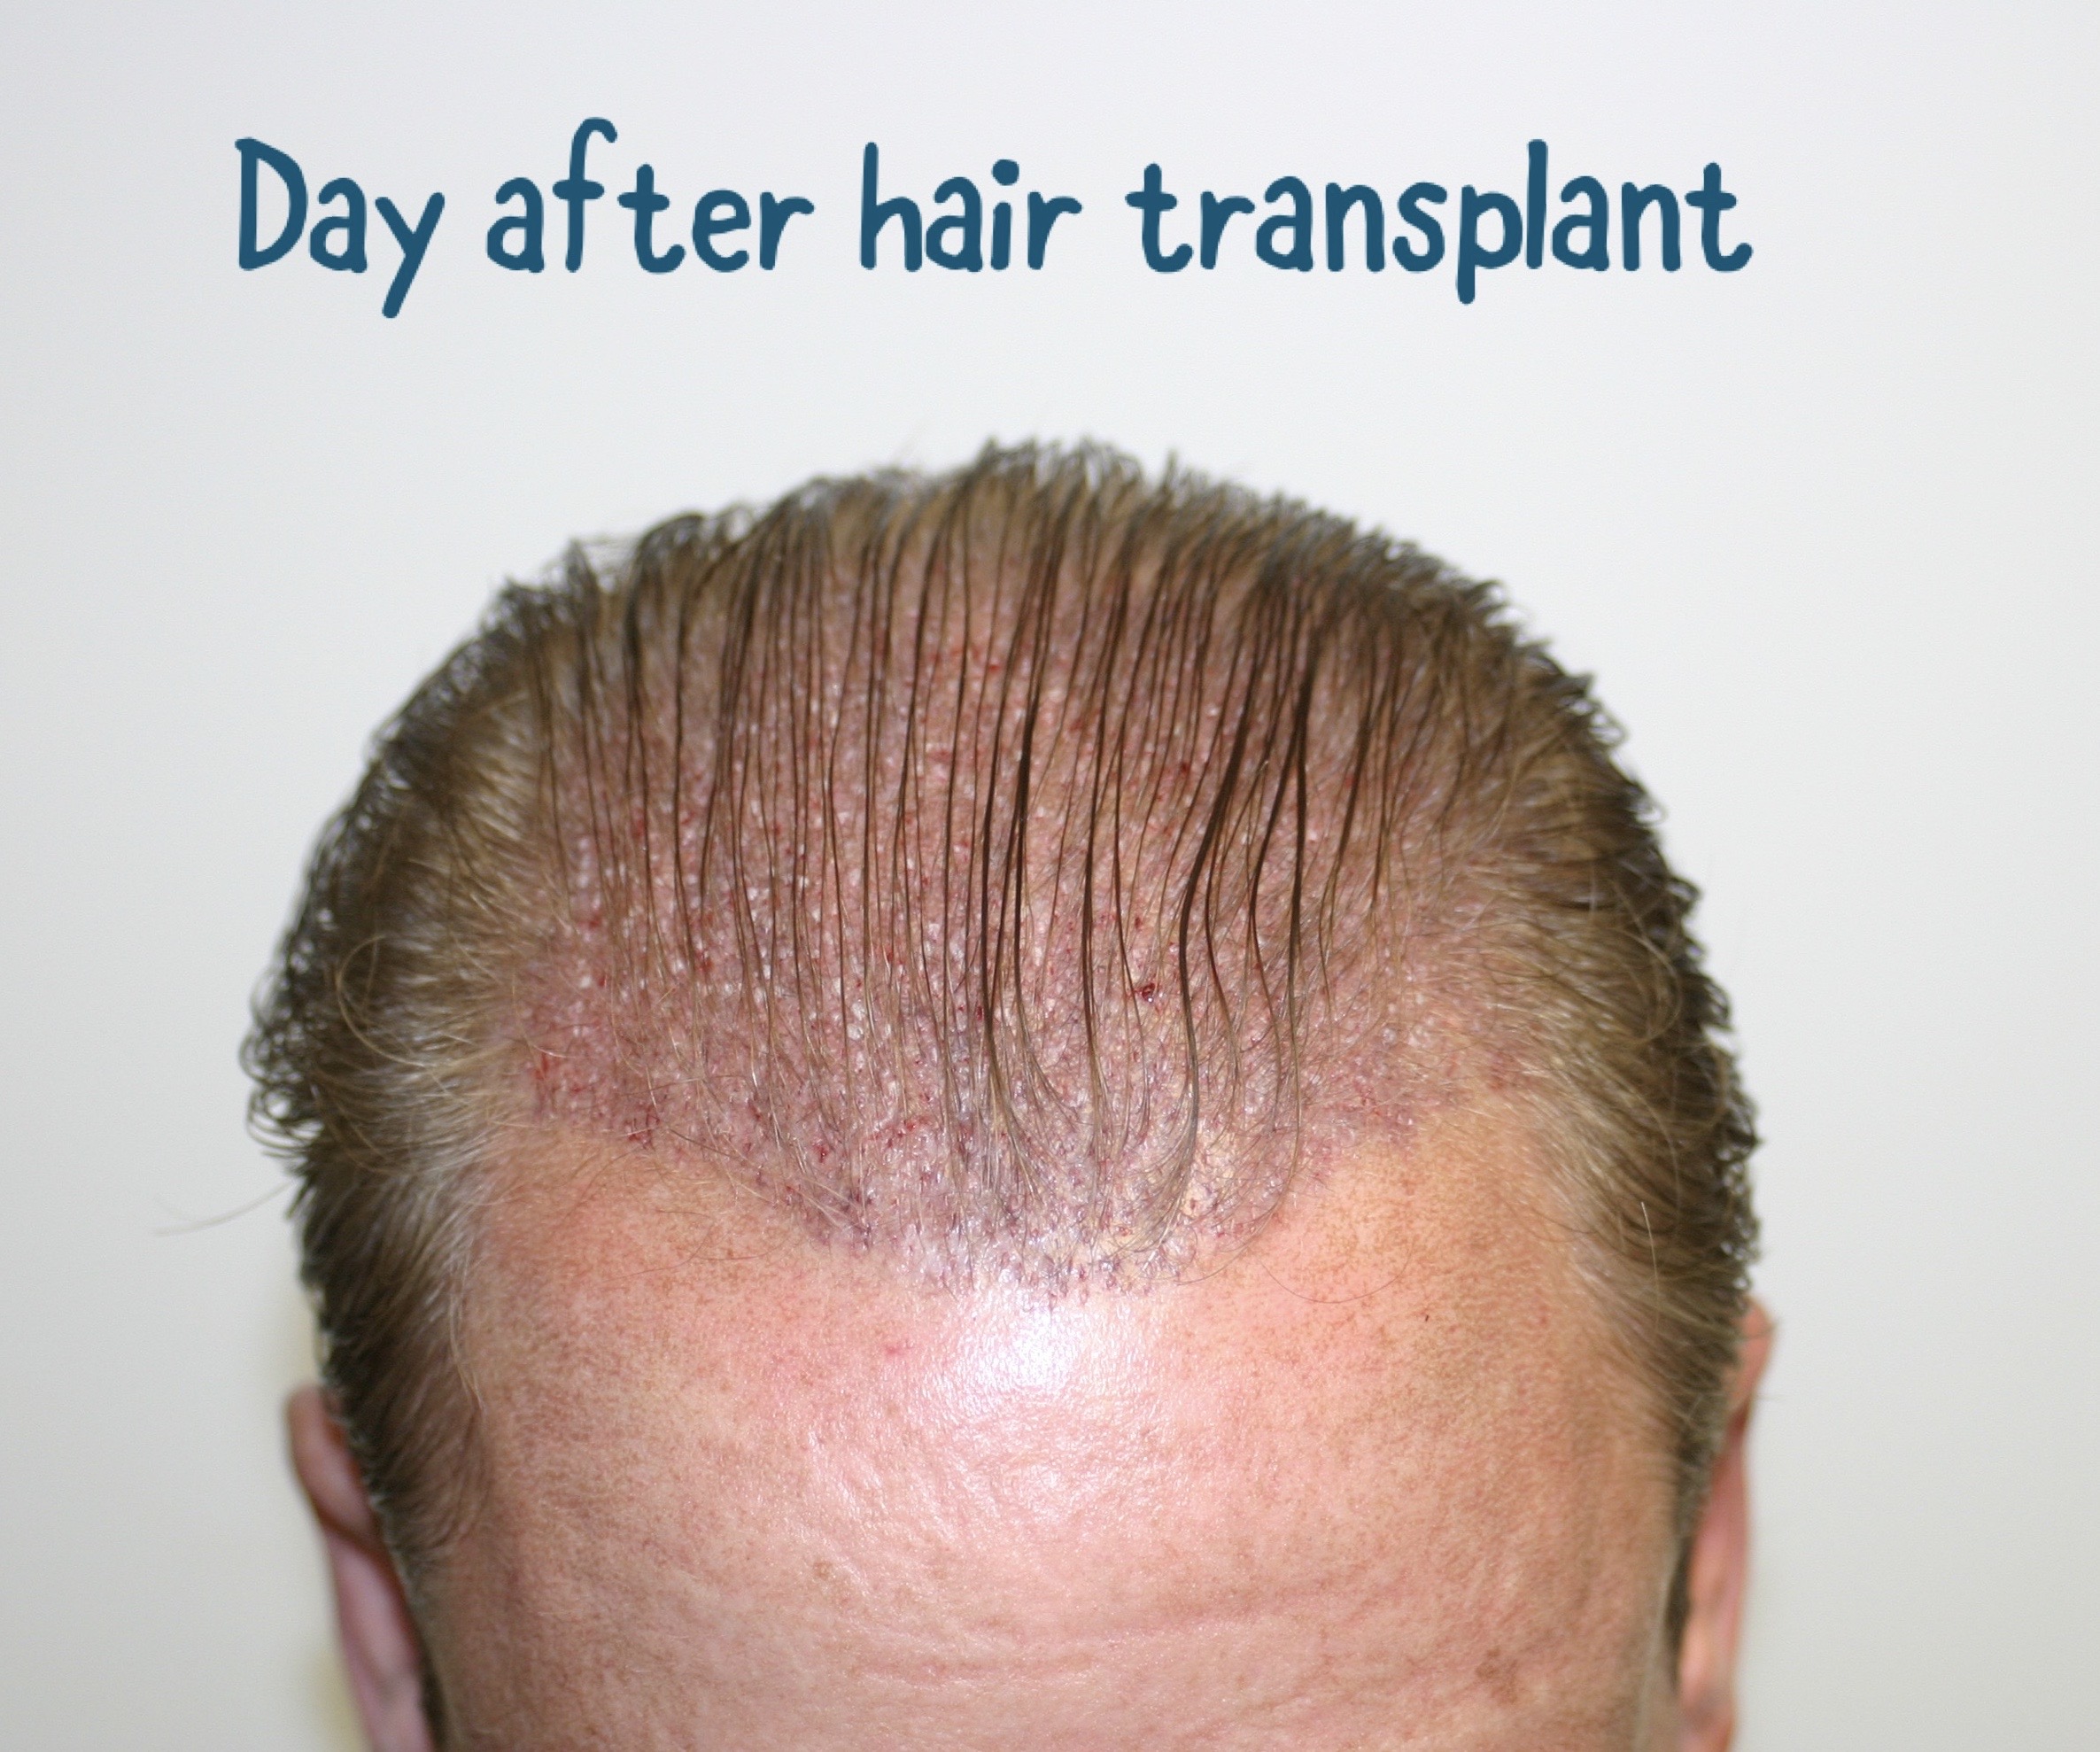 Are Female Hair Transplants on the Rise Two Women on Their Hair Loss